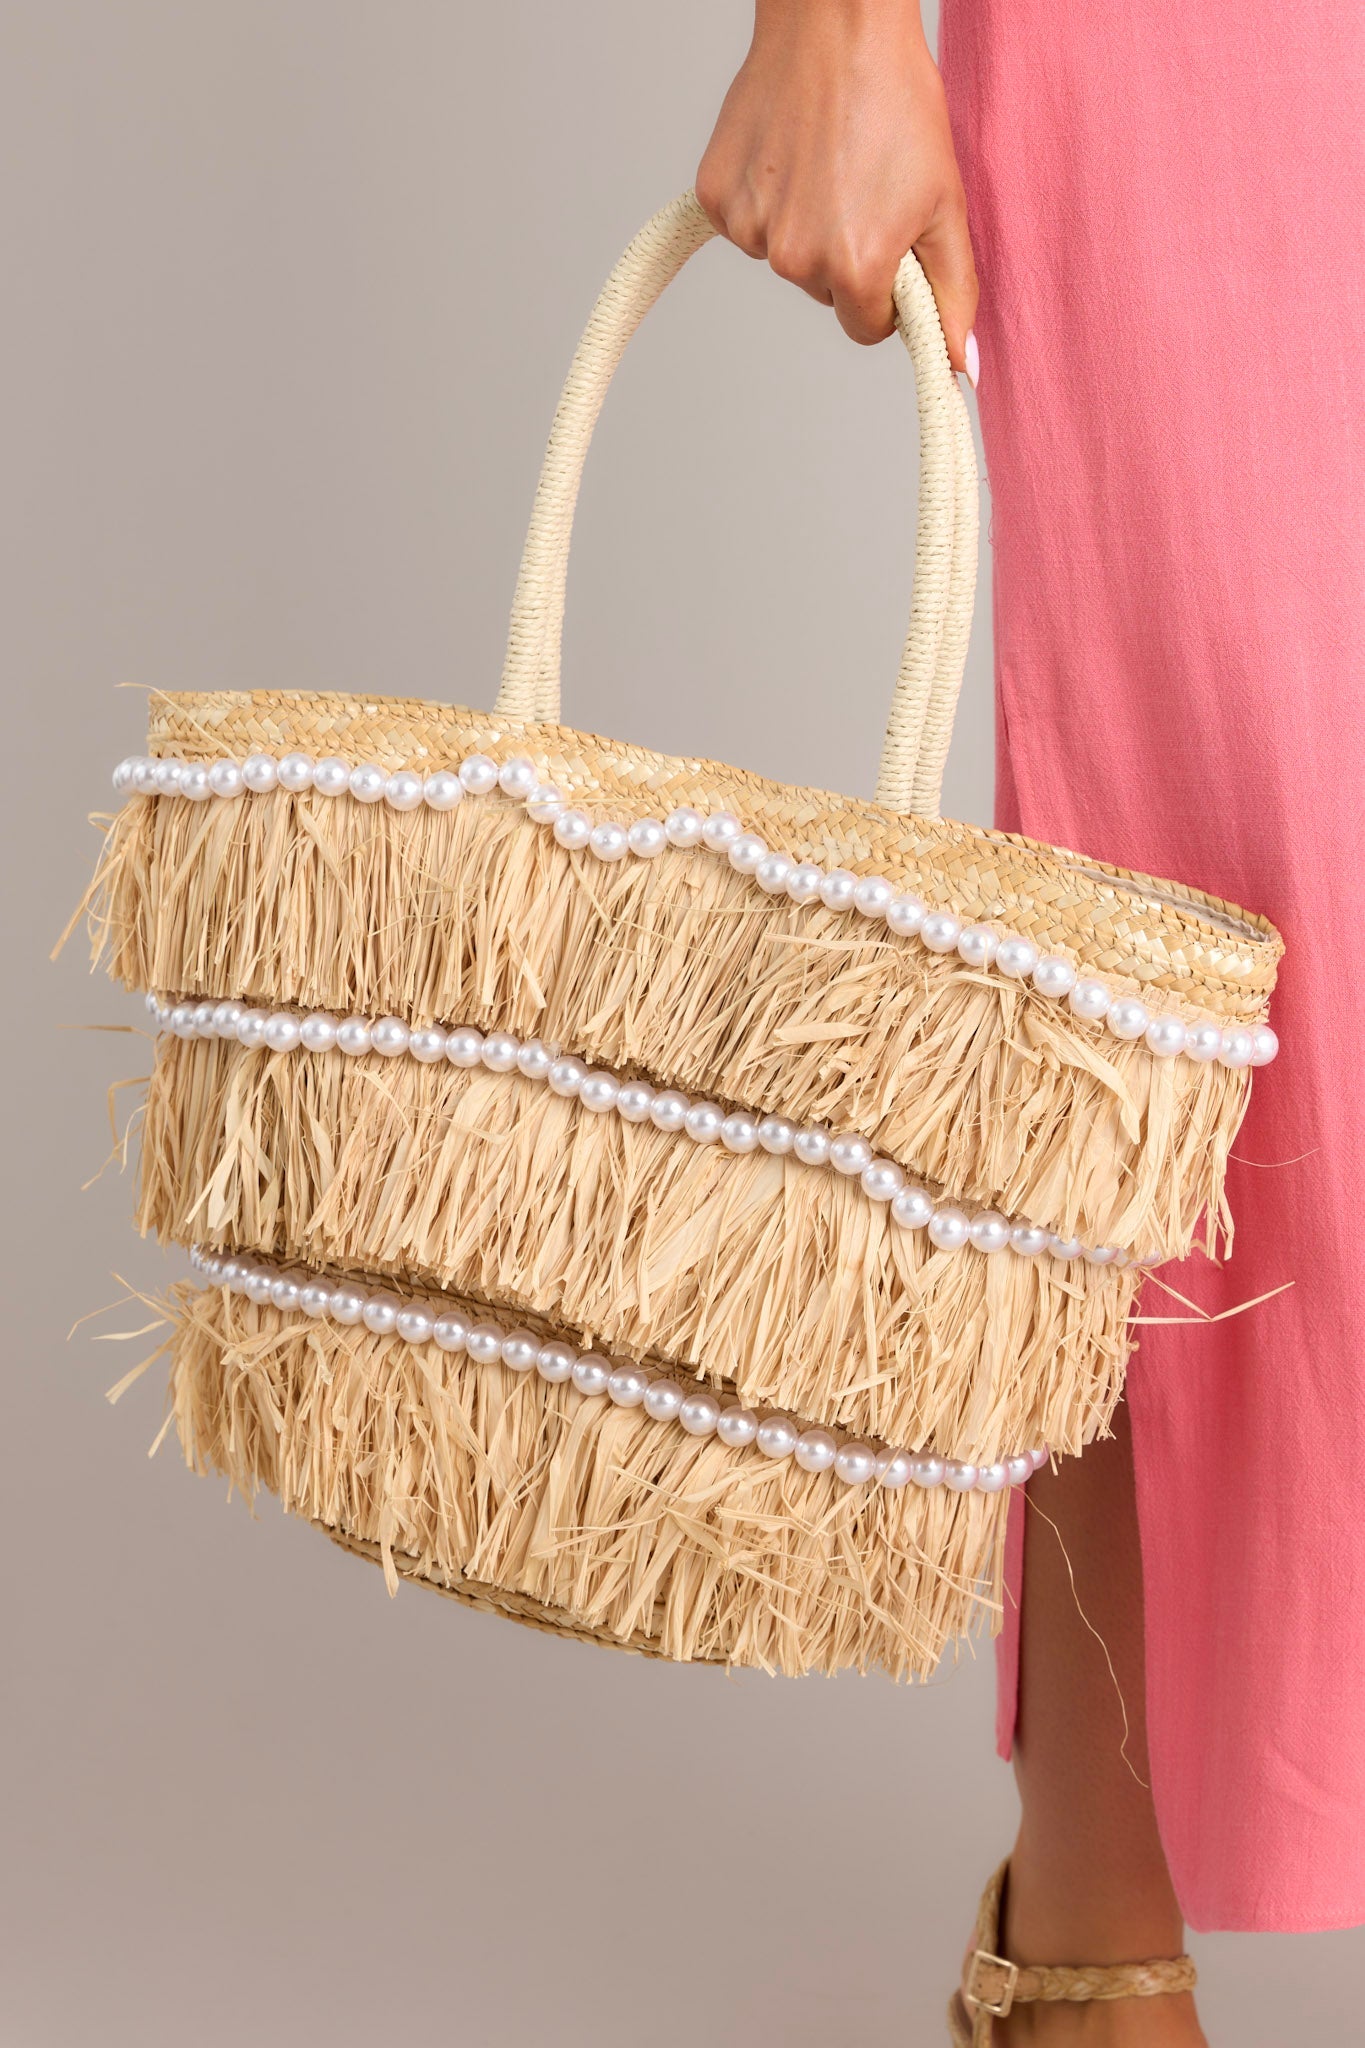 Close up view of this tote bag that features a woven designed, straw fringe detailing, rows of pearls, and double woven handles